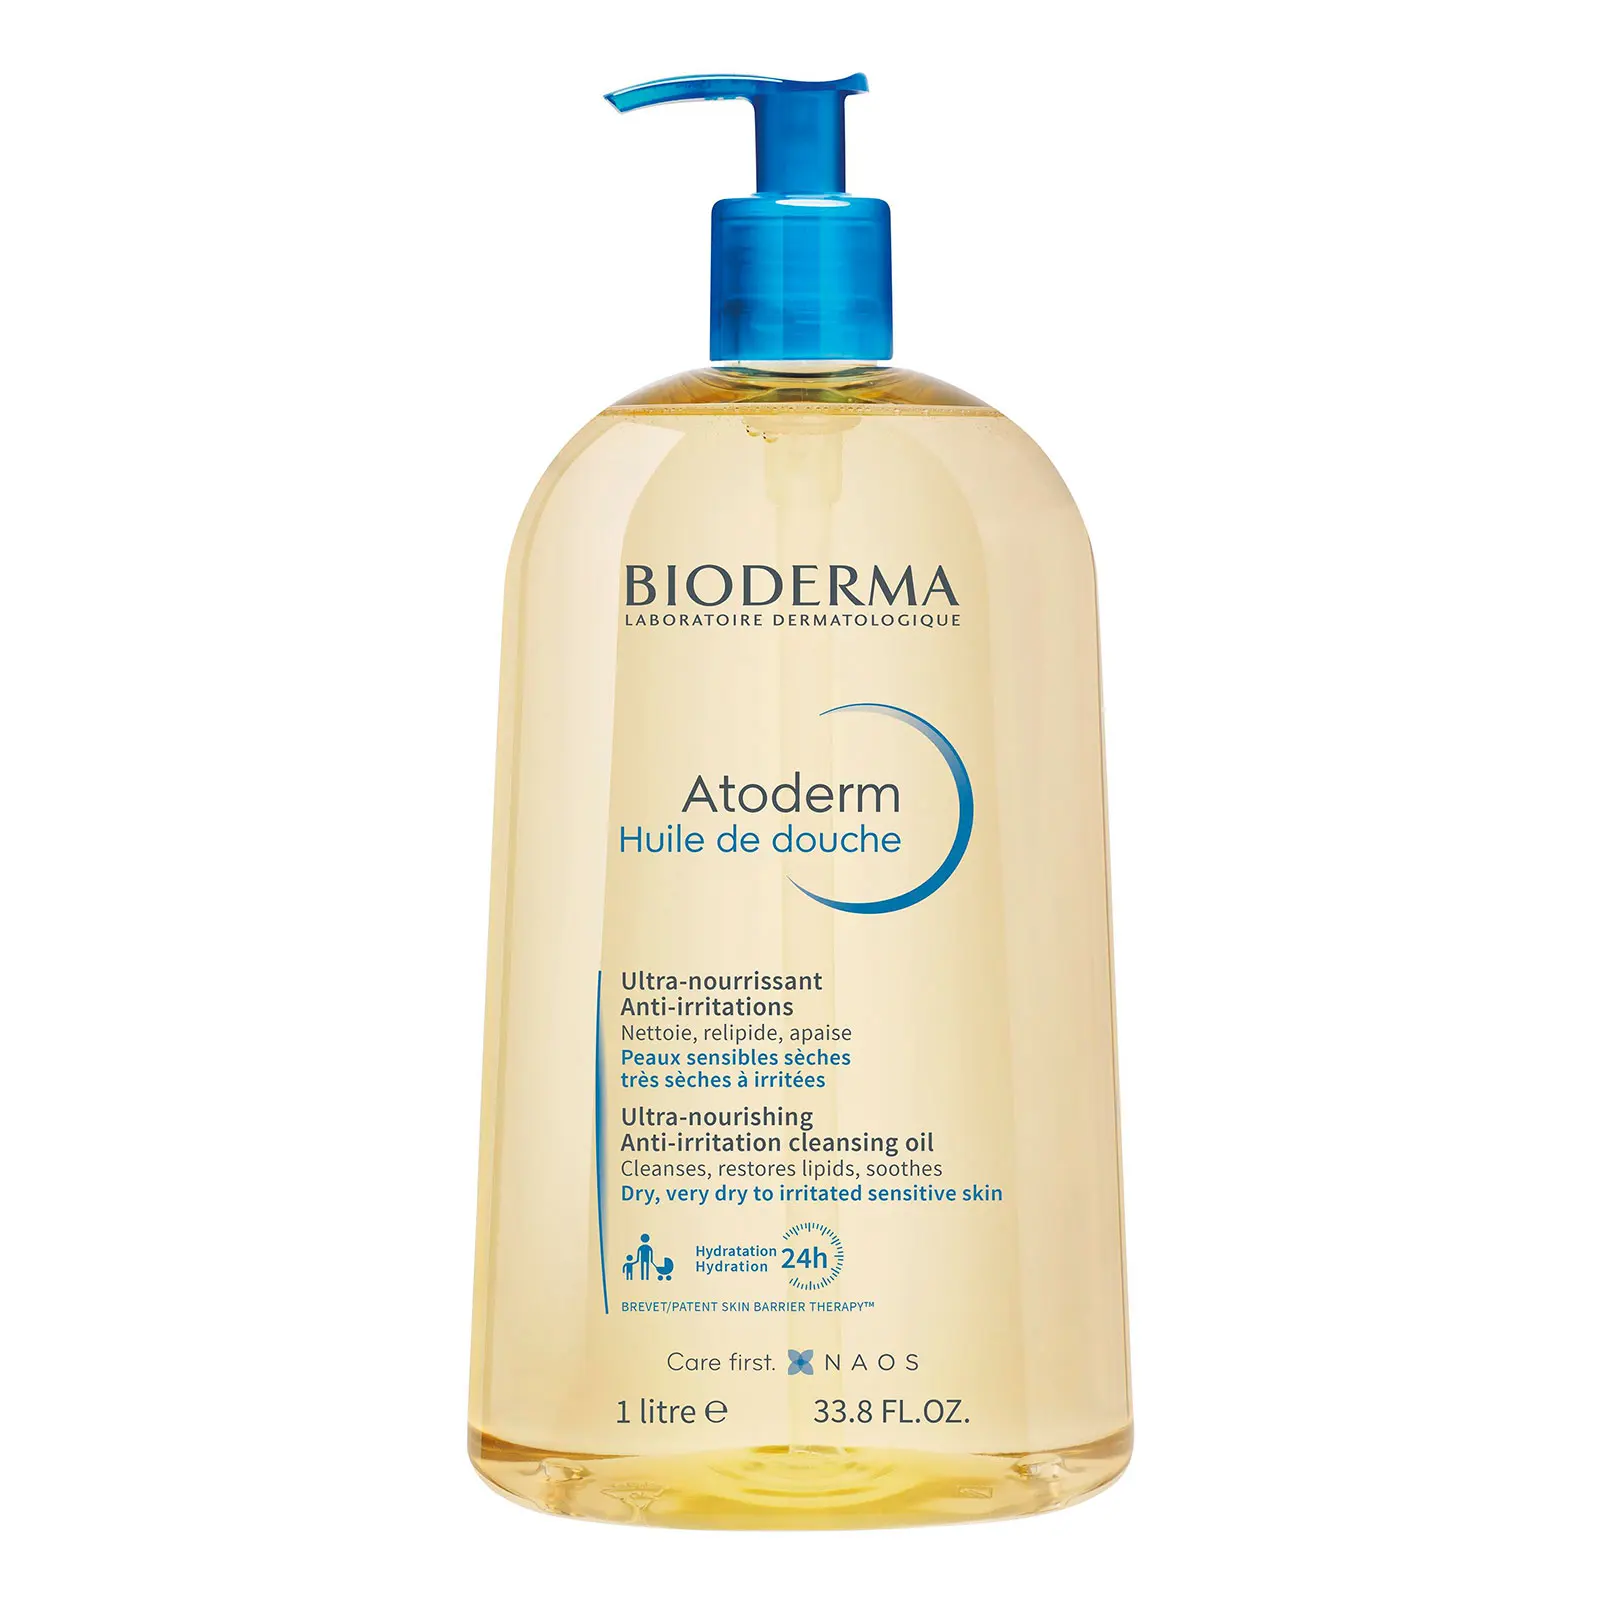 BIODERMA Atoderm Normal To Very Dry Skin Face and Body Cleanser 1000ml Discounts and Cashback